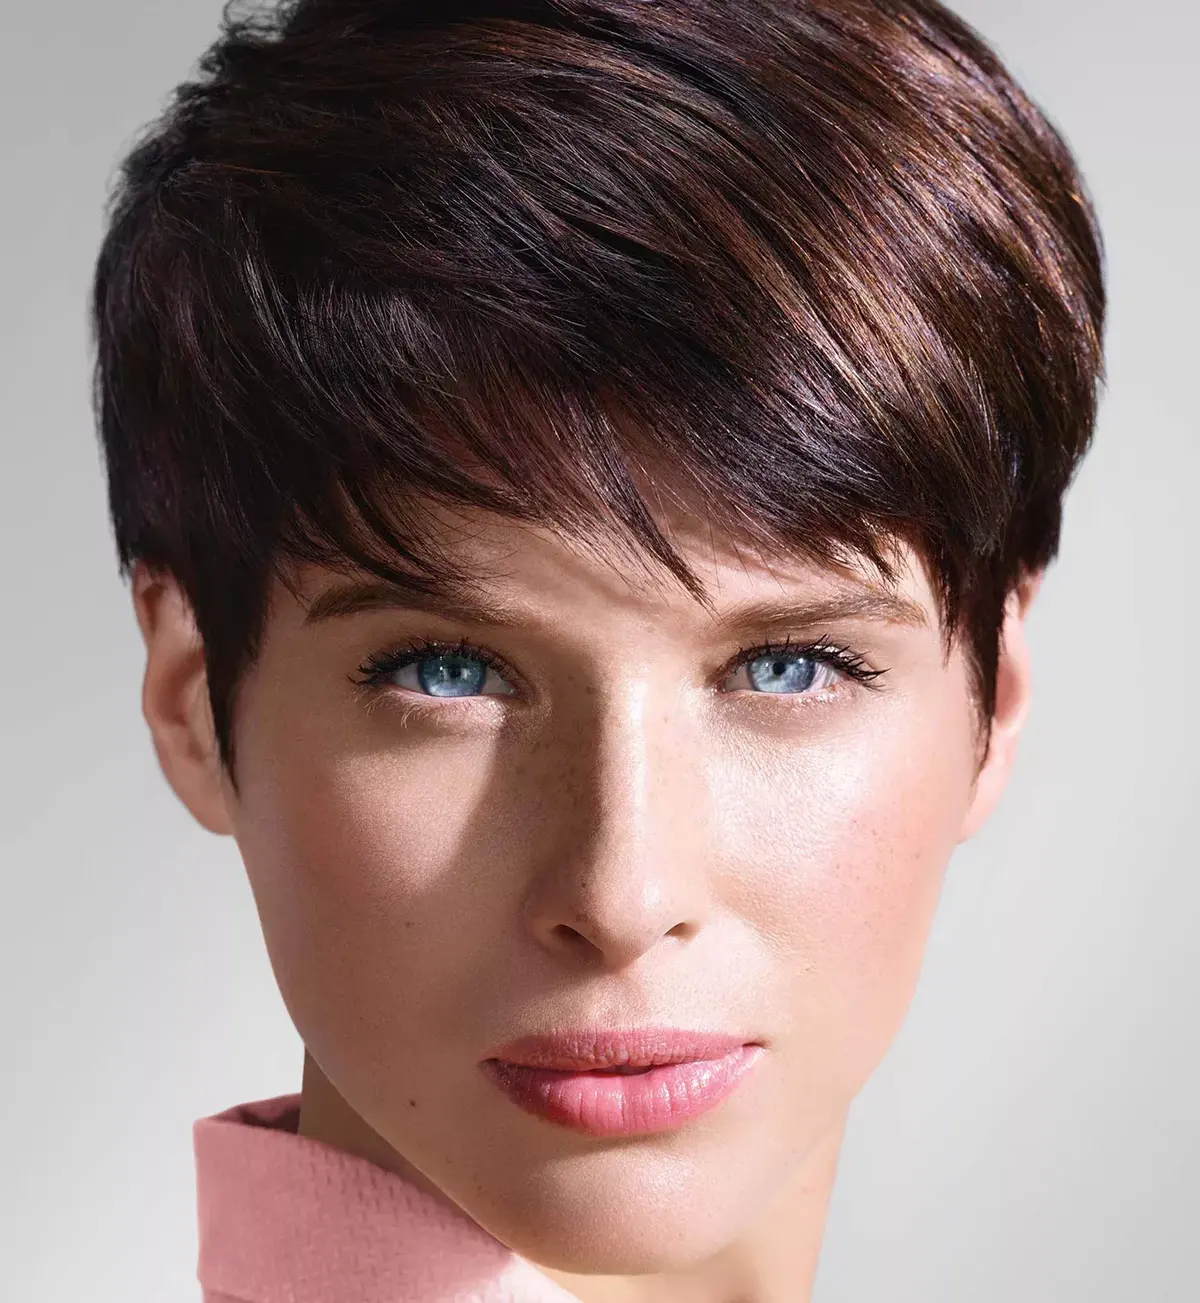 blue-eyed brunette with pixie cut how to style it